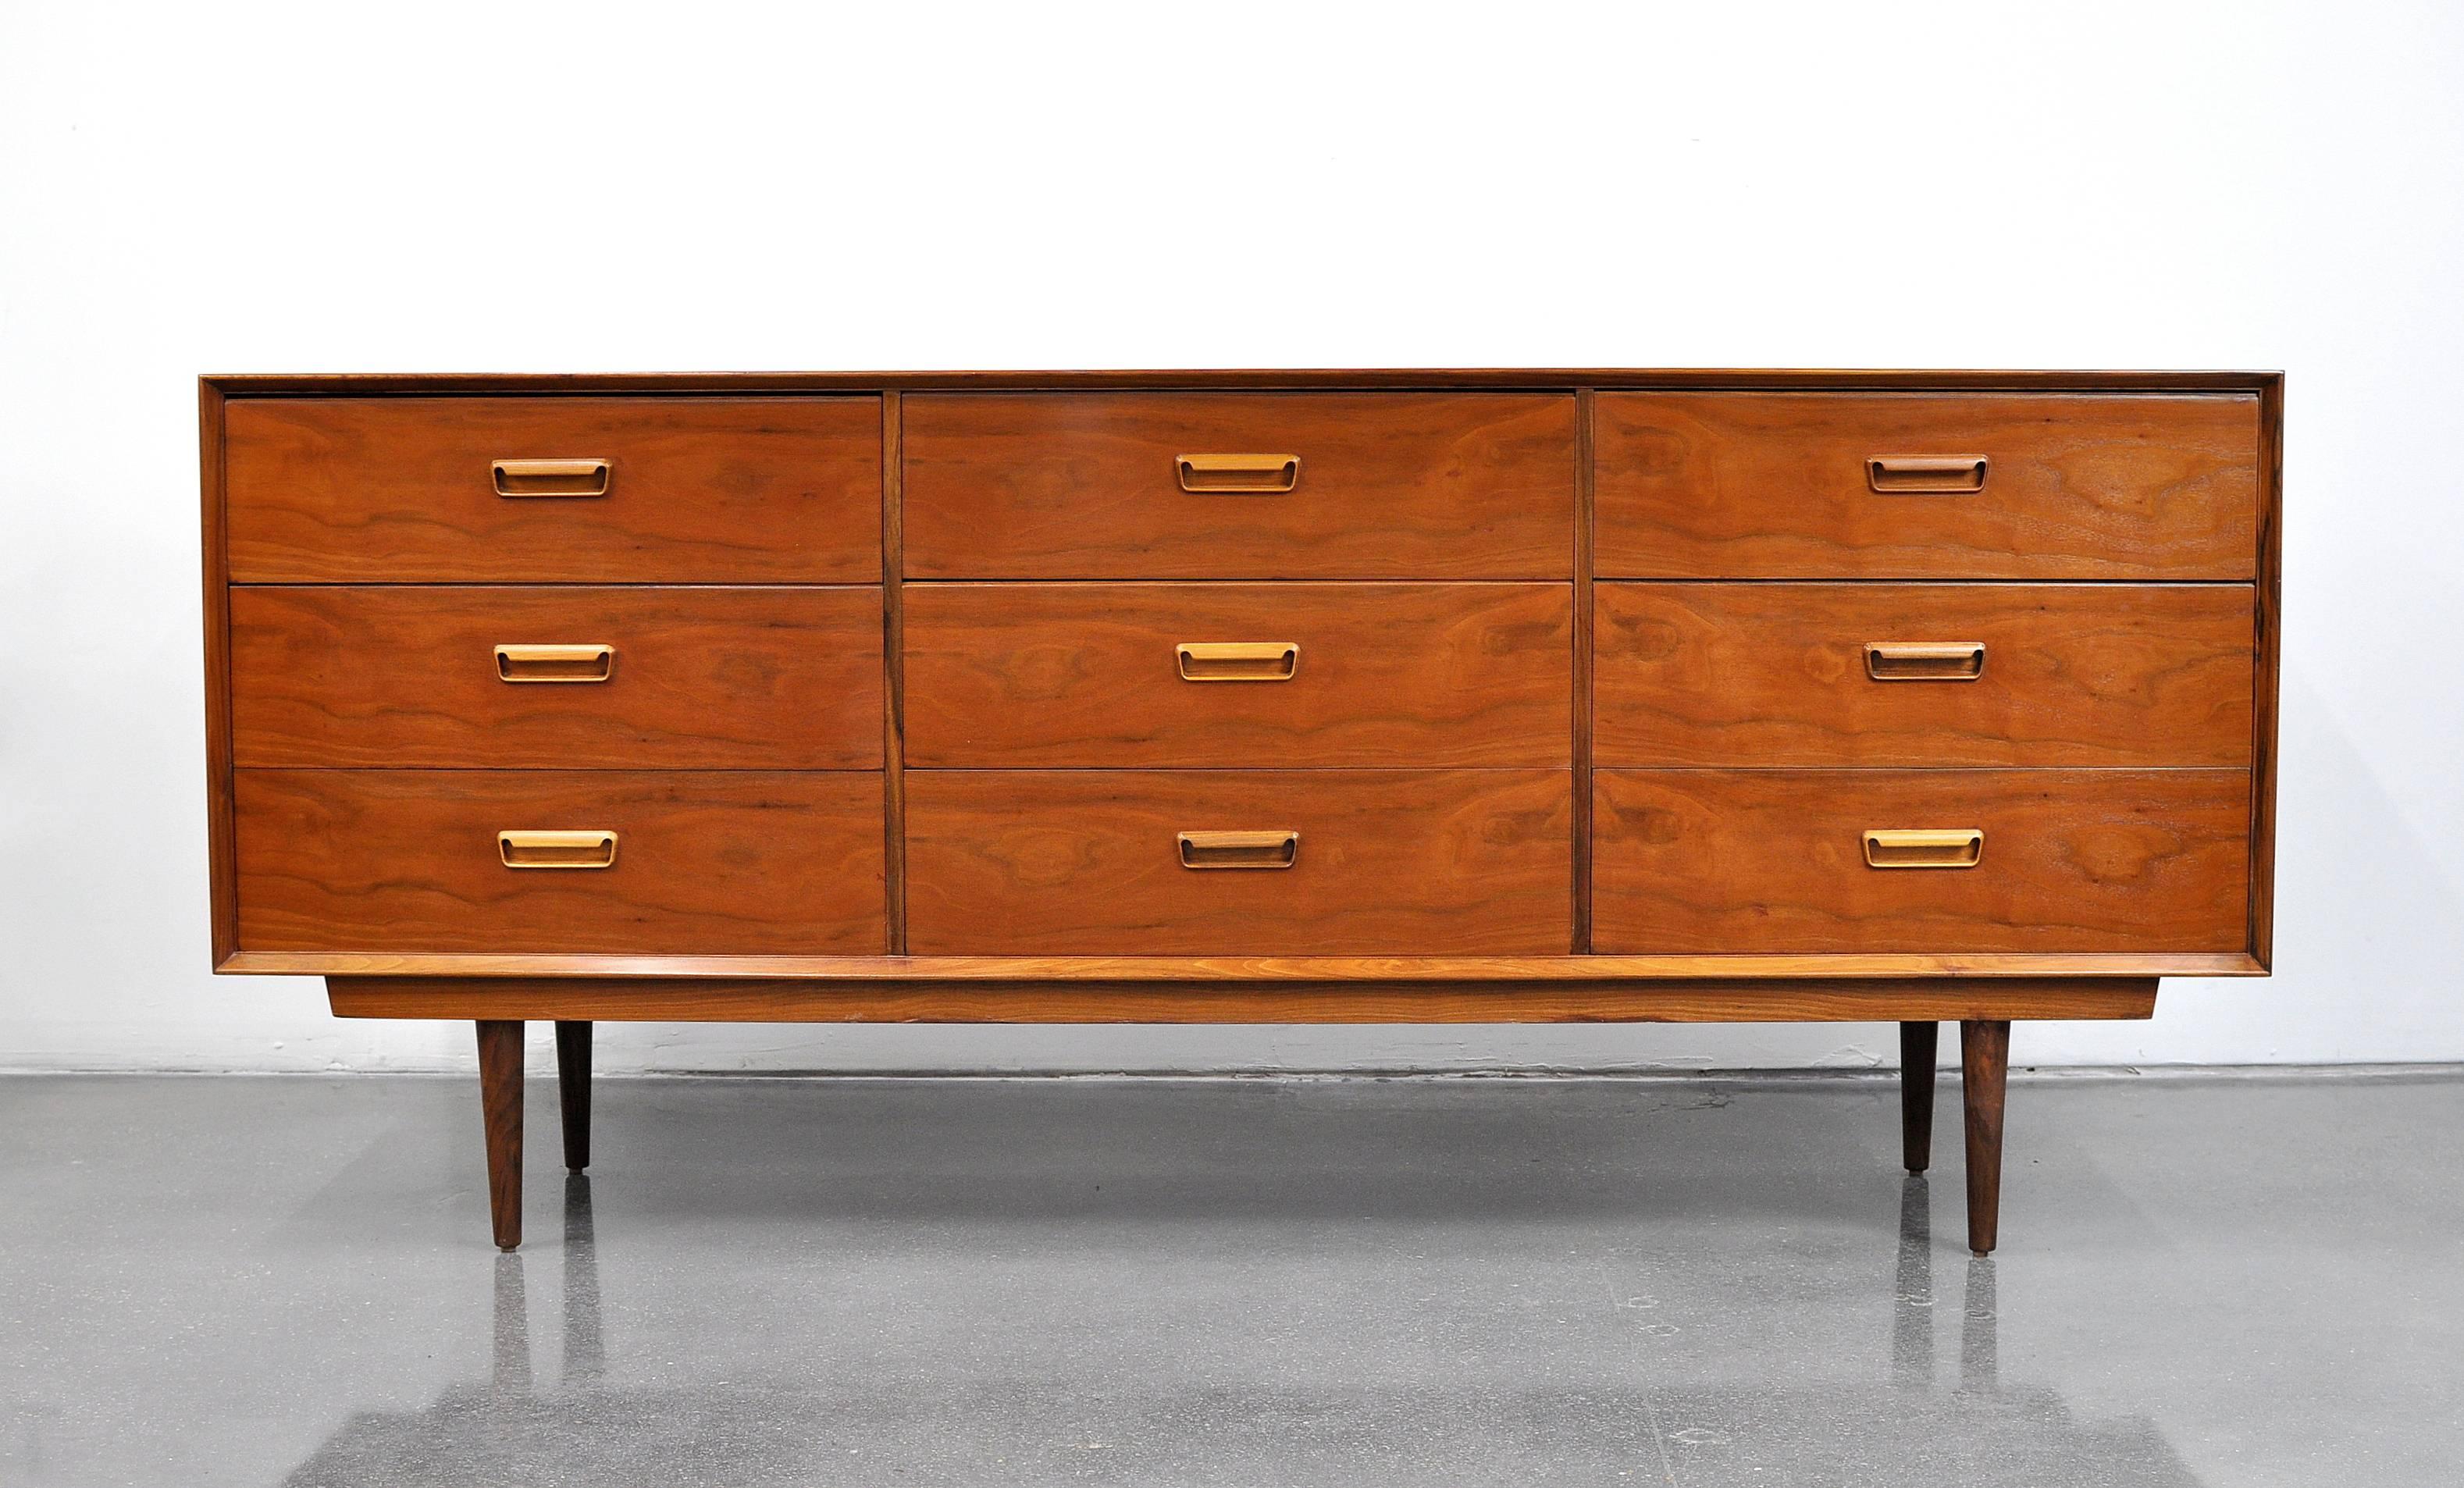 A stunning Mid-Century Danish Modern vintage rosewood credenza with finished back, designed by Arne Wahl Iversen, and dating from the 1960s. The dresser features nine drawers with mahogany interiors which provide ample storage space. Six of the